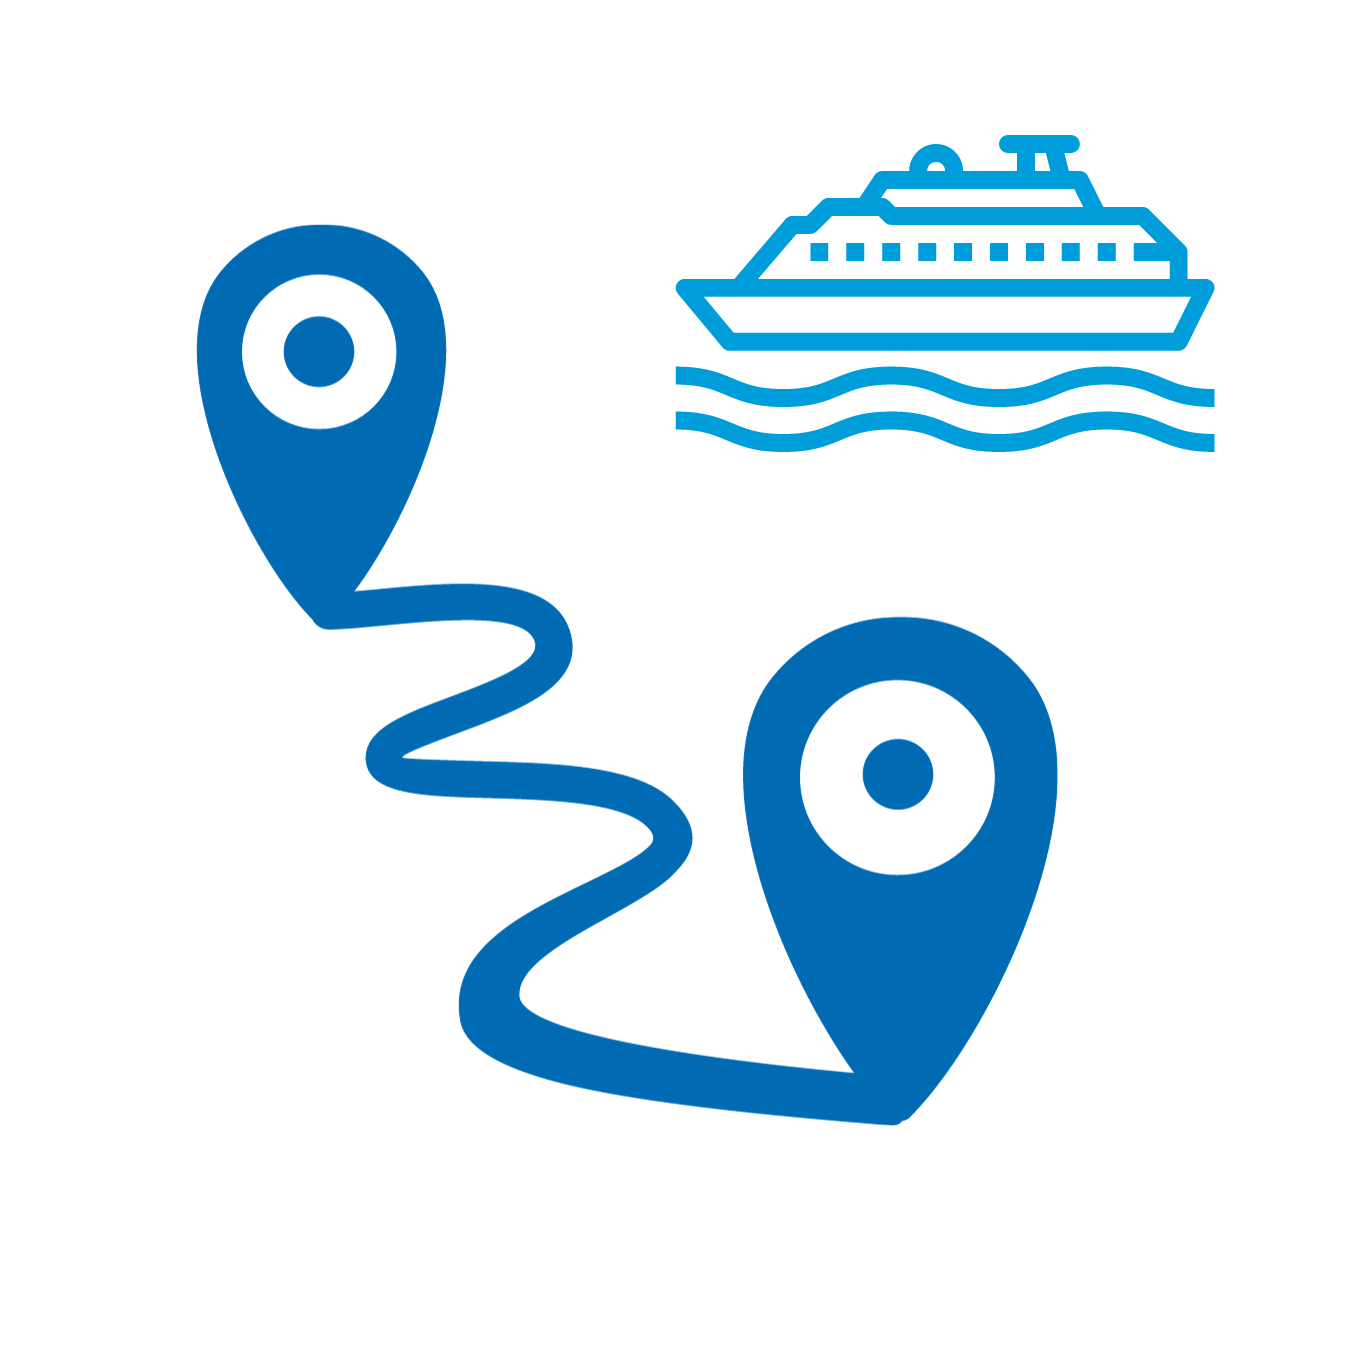 Ferry icon with road location map